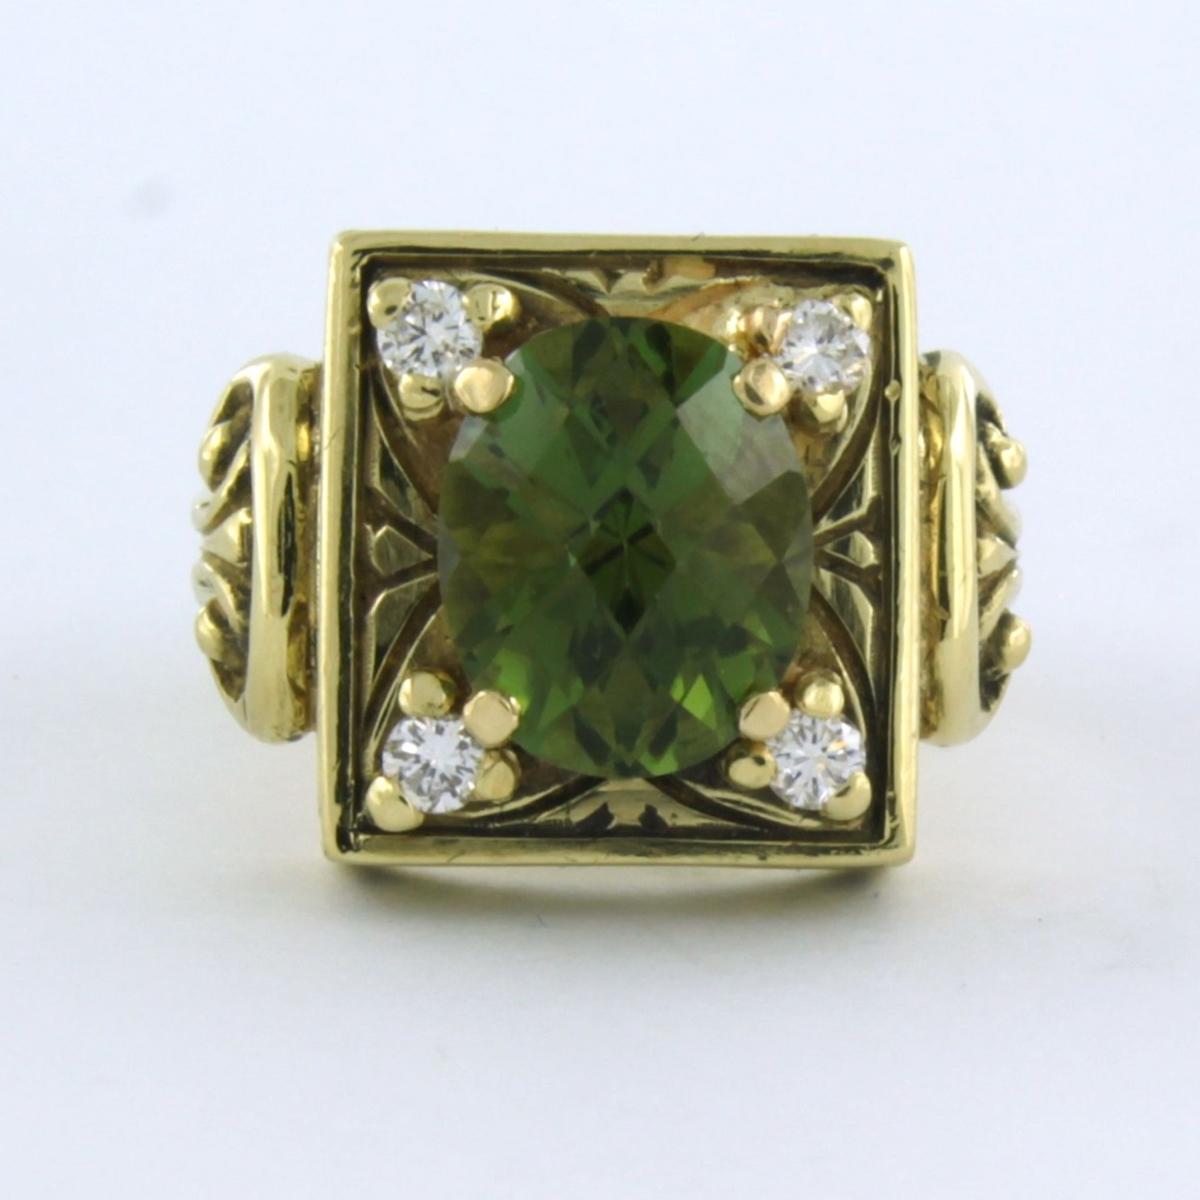 18k yellow gold ring set with tourmaline 2.40 ct and brilliant cut diamond 0.16 ct -F/G - VS/SI - ring size U.S. 6.0 - EU. 16.5(52)

Detailed description

the top of the ring is 1.5 cm wide and 7.5 mm high

ring size U.S. 6.0 - EU. 16.5(52), the